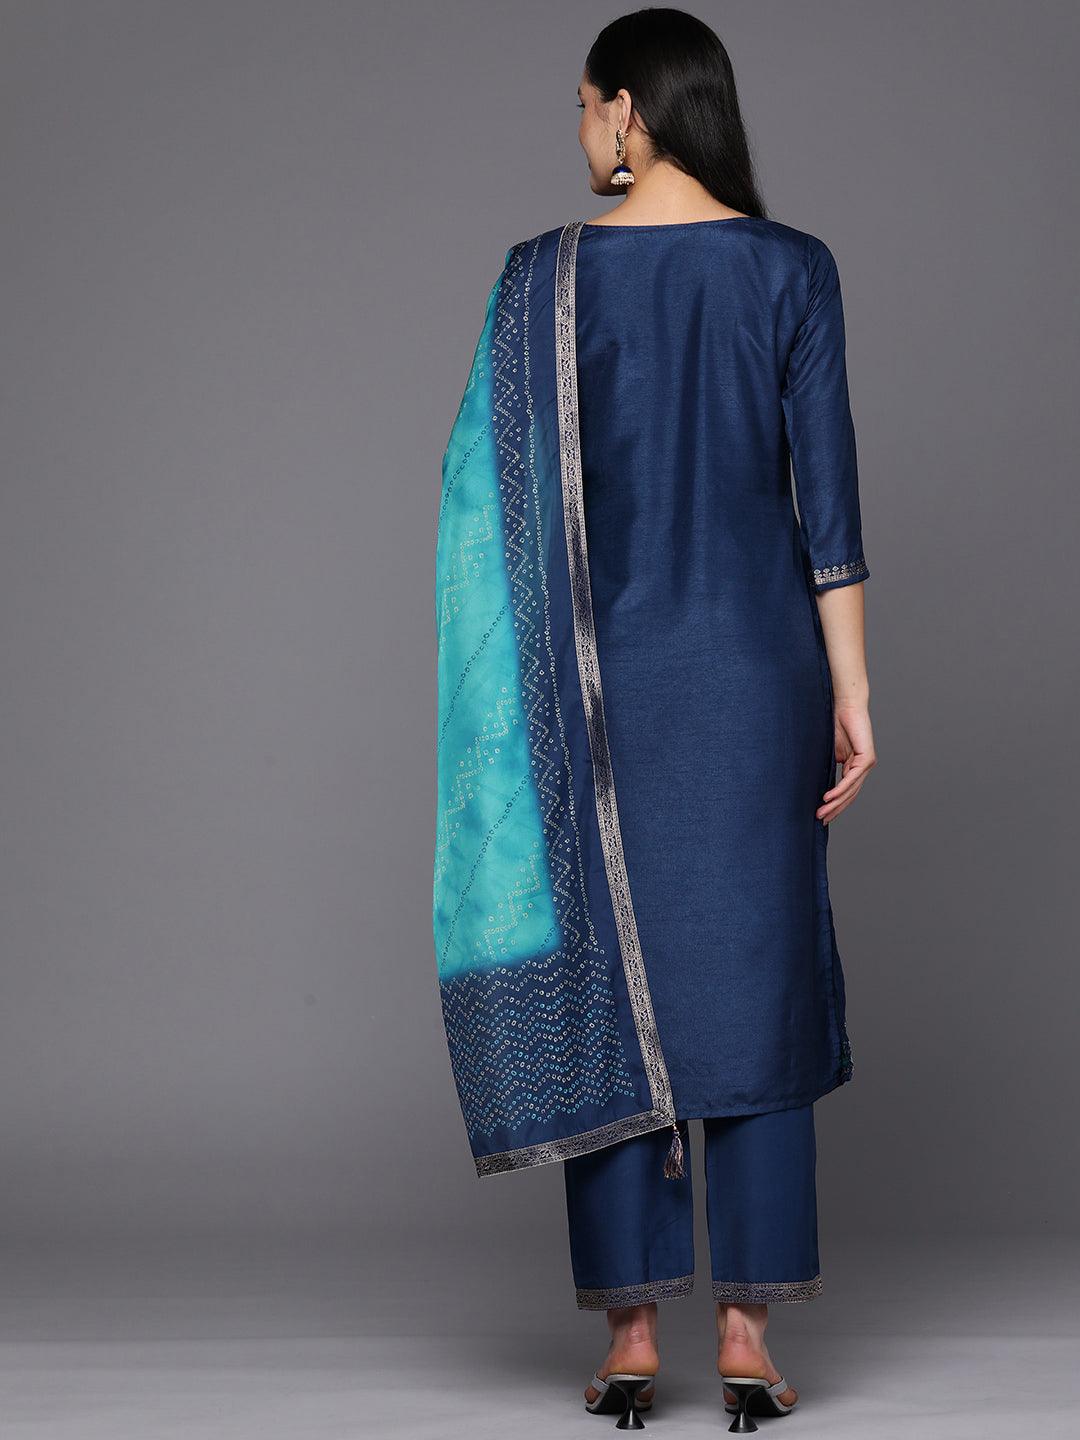 Blue Self Design Silk Blend Straight Suit Set With Trousers - Libas